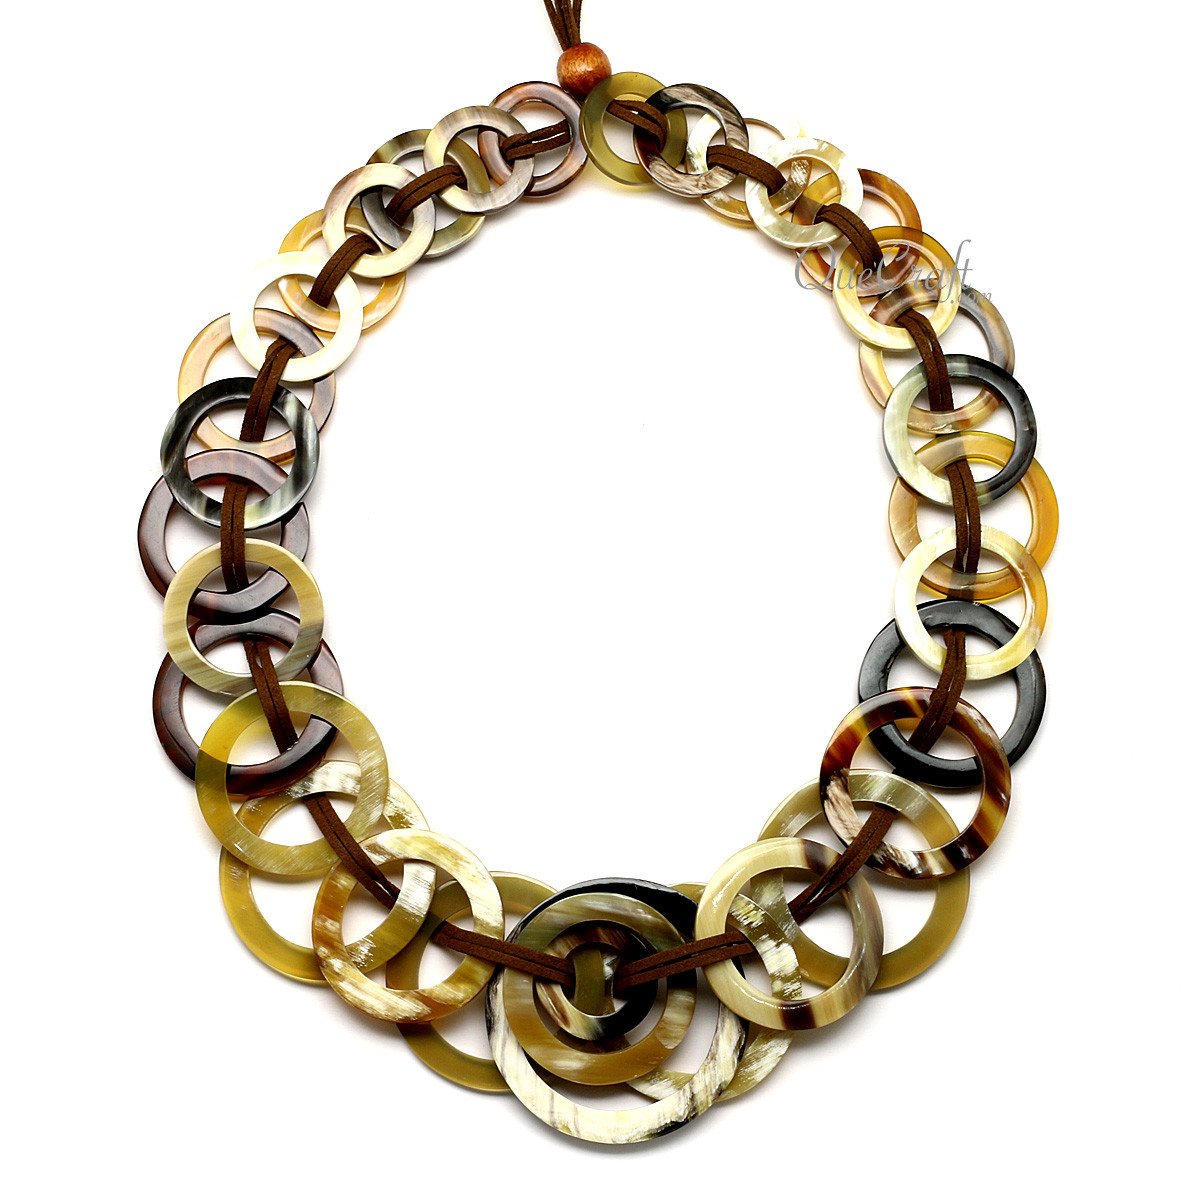 Horn Chain Necklace #12614 - HORN JEWELRY